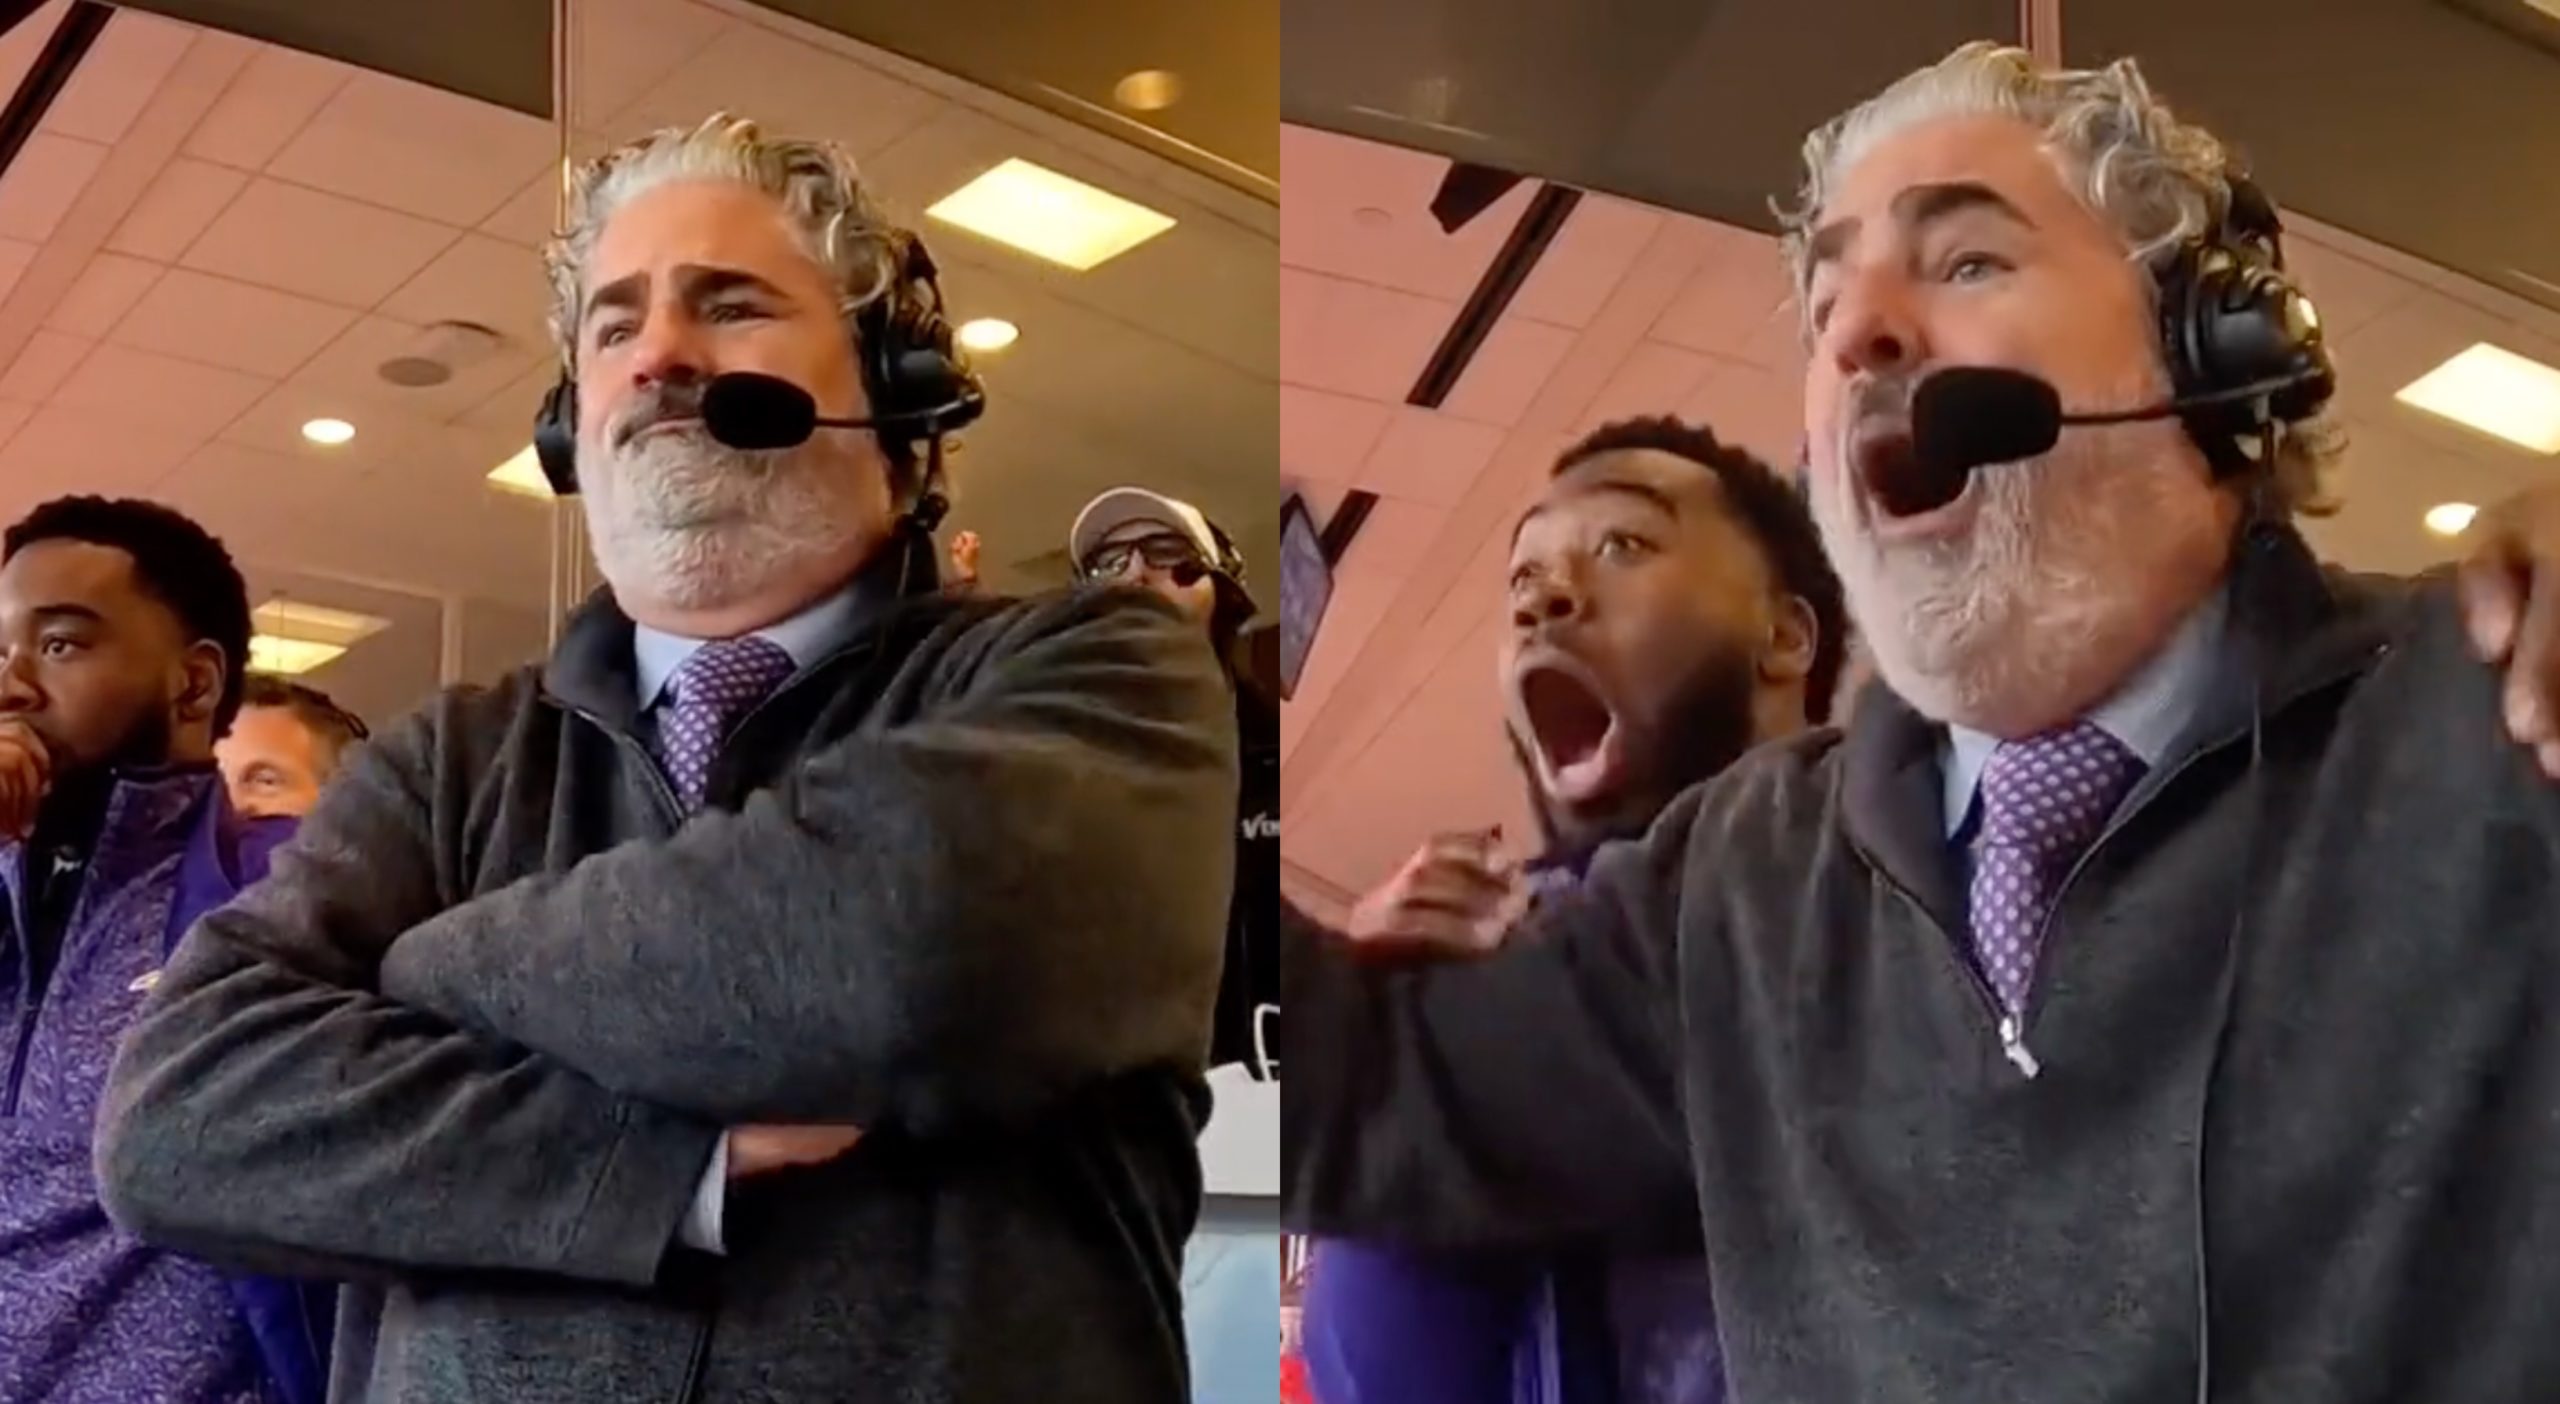 Vikings radio team going absolutely bonkers calling chaotic ending